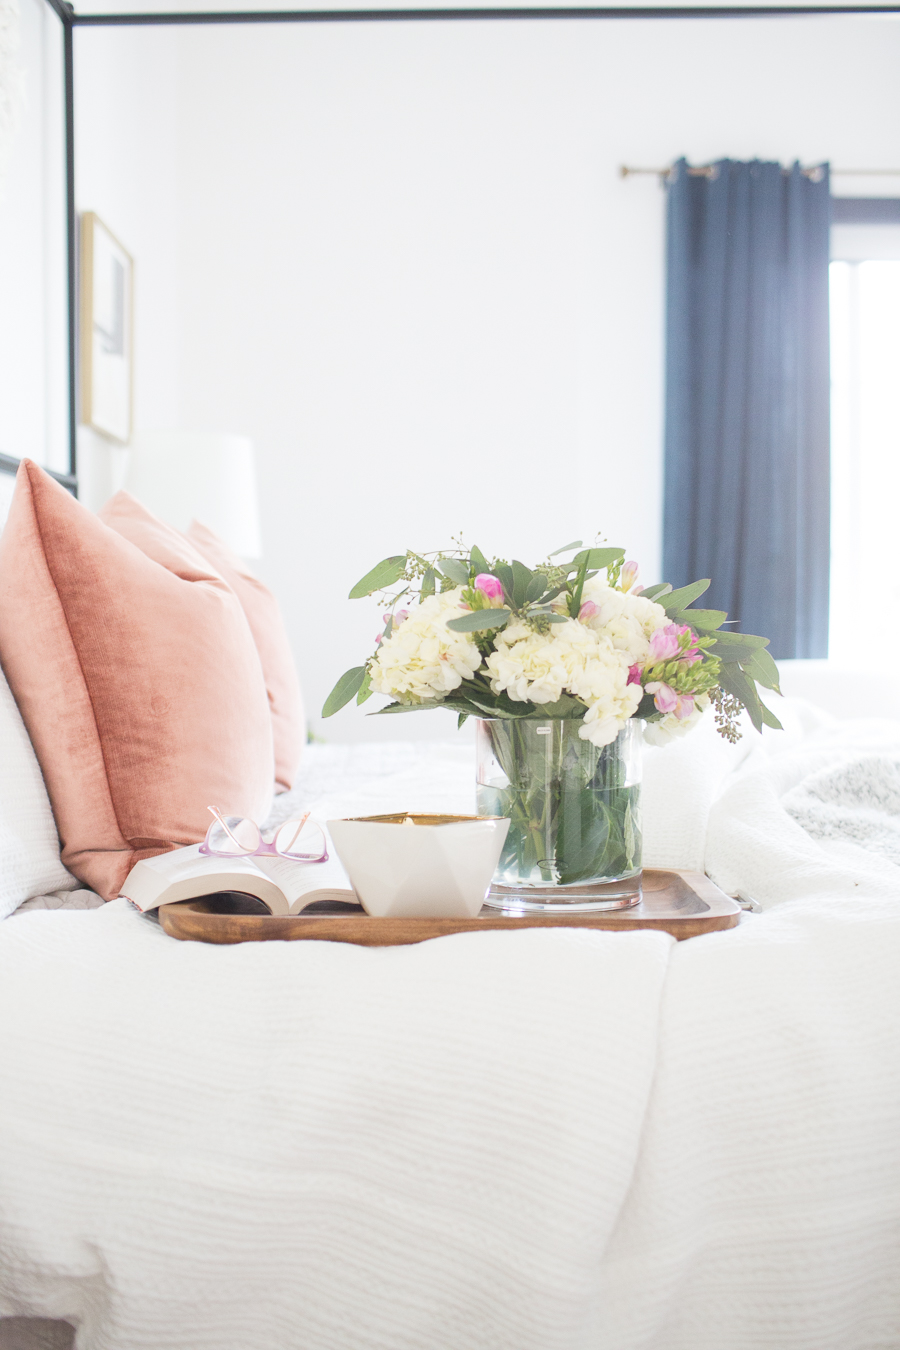 Refresh Your Master Bedroom and Bath with Pottery Barn floral arrangement on wooden tray with an open book and reading glasses sitting on white bedding